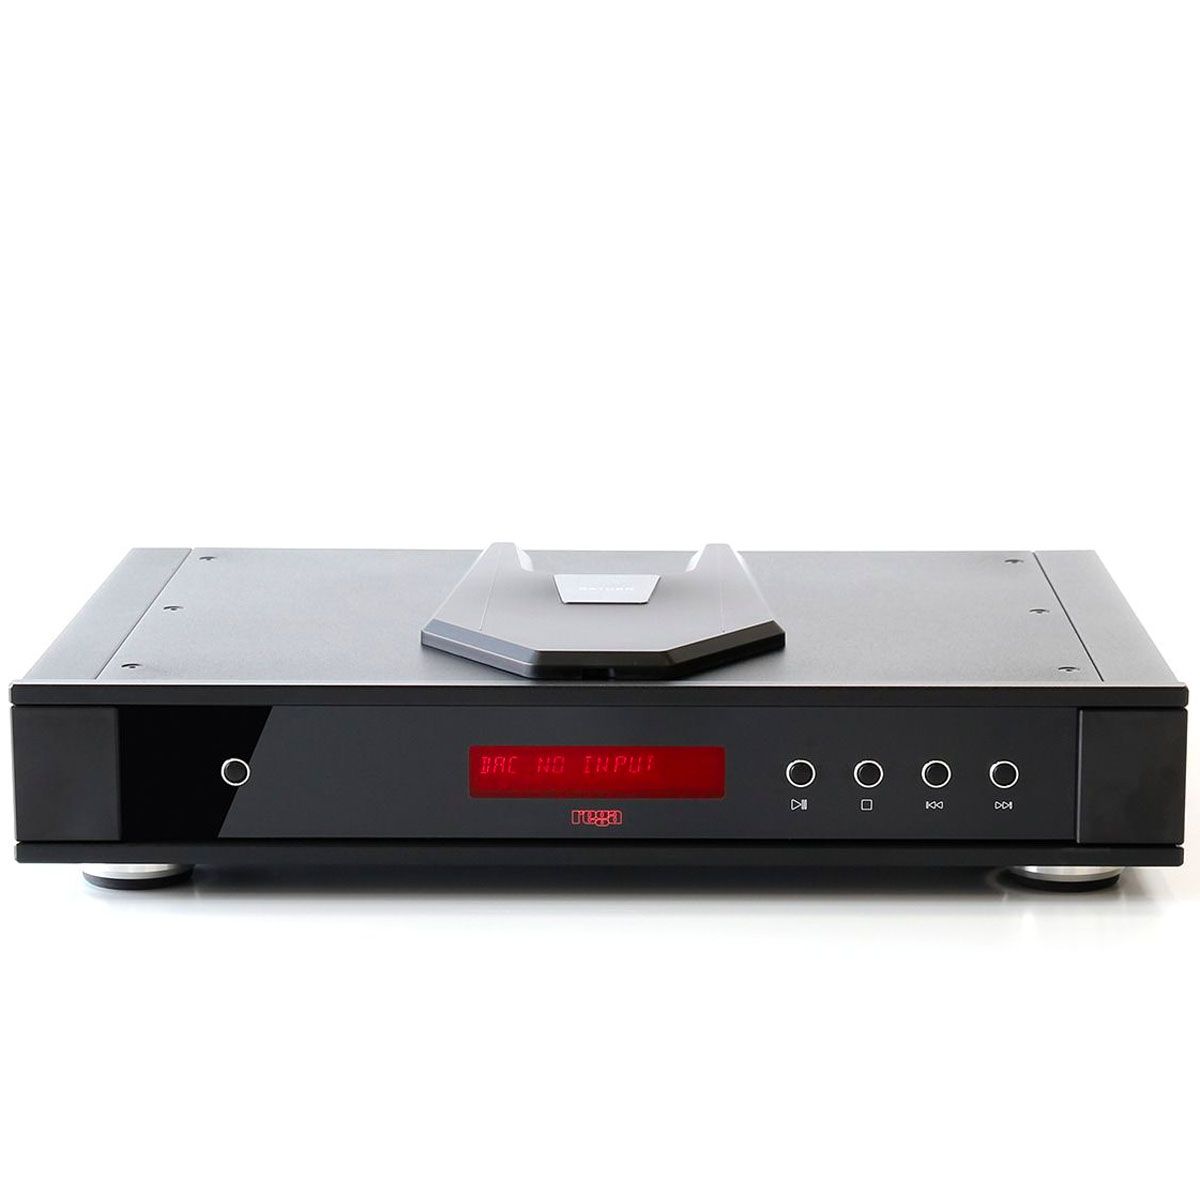 Rega Saturn MK3 CD & DAC Player - front view with lid closed